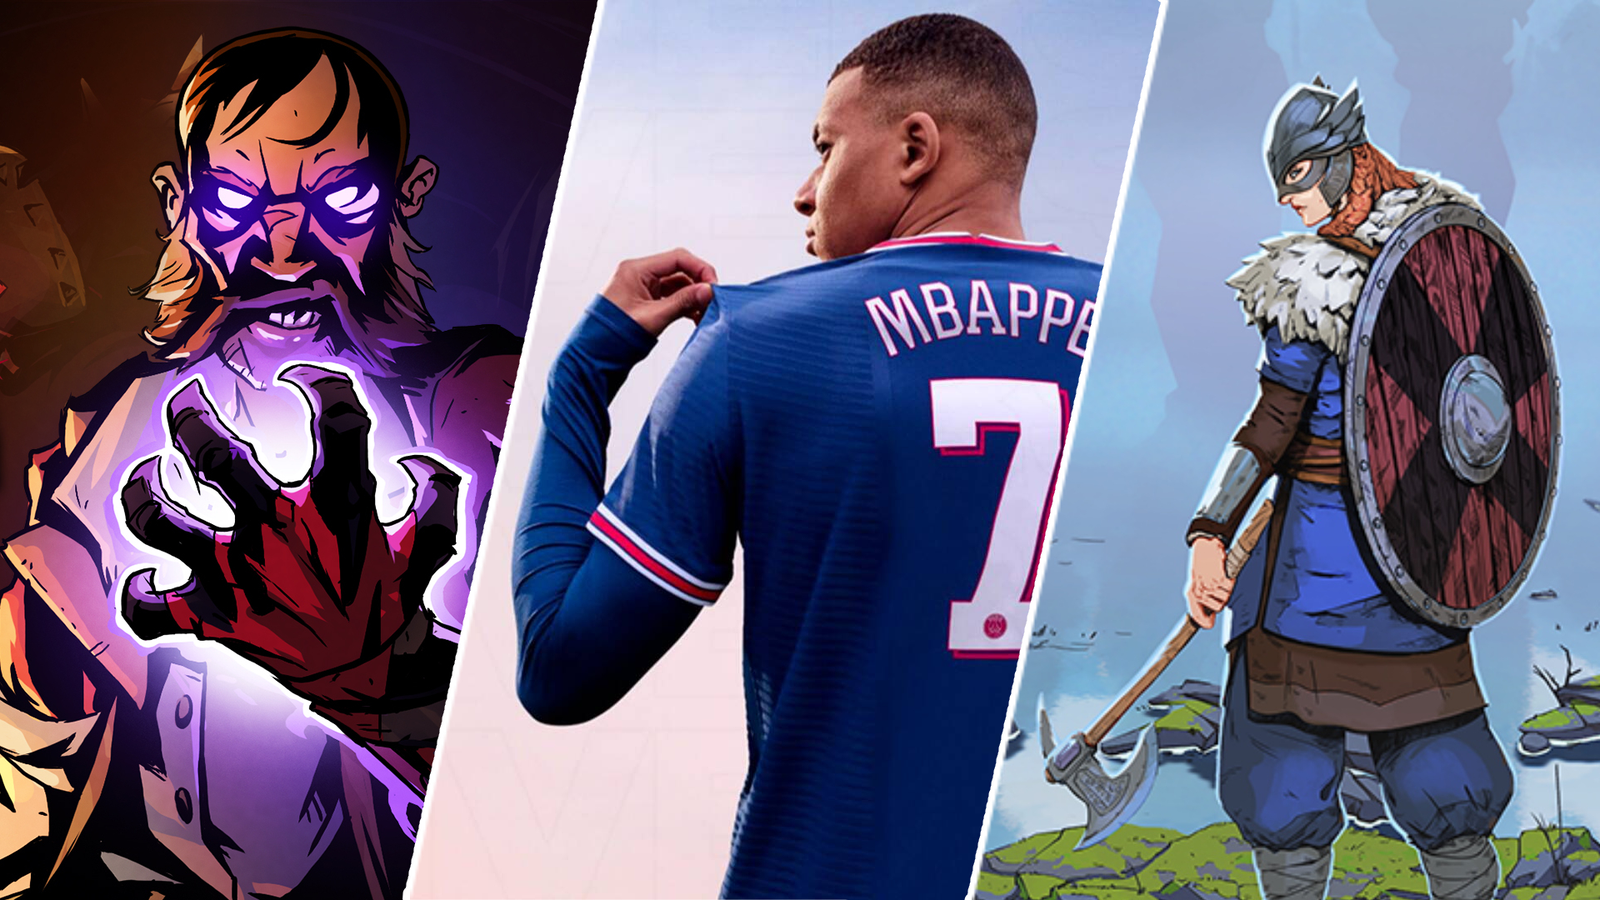 PlayStation Plus games for May: FIFA 22, Tribes of Midgard, Curse